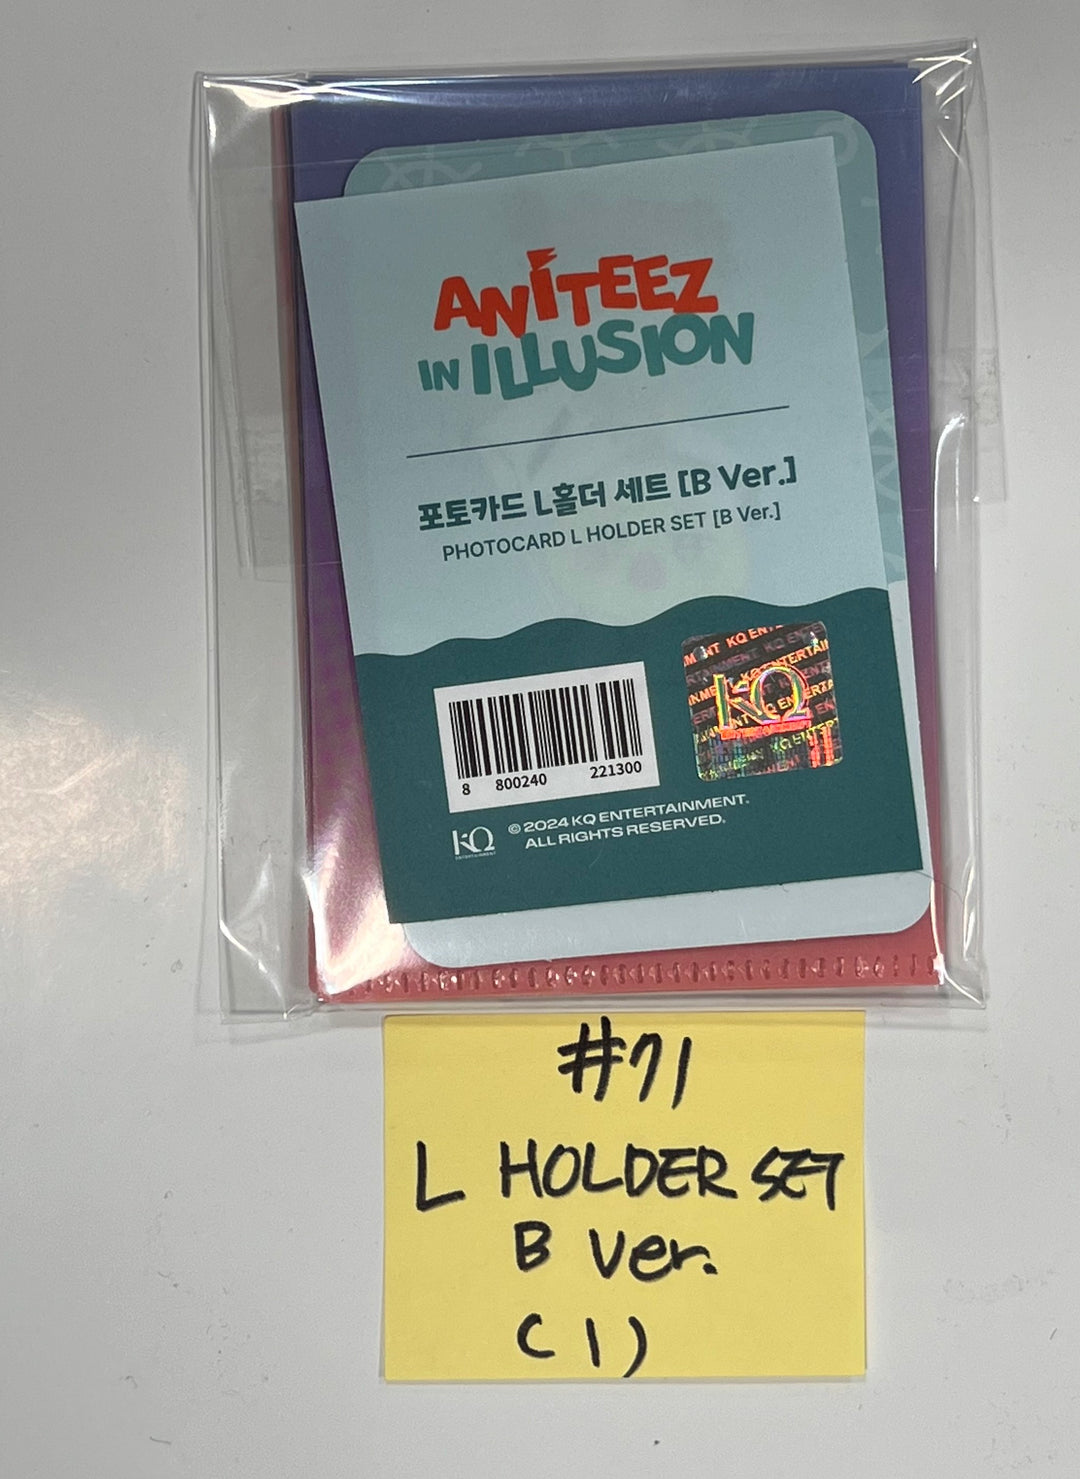 ATEEZ X ANITEEZ ADVENTURE "ANITEEZ IN ILLUSION" - Pop-Up Store Official MD [Acrlic pendant pen, L-Holder Set, Log Photo Note, Tin candle, Mini Cross Bag, Cookie Box, Clear Sticker] [24.2.16]